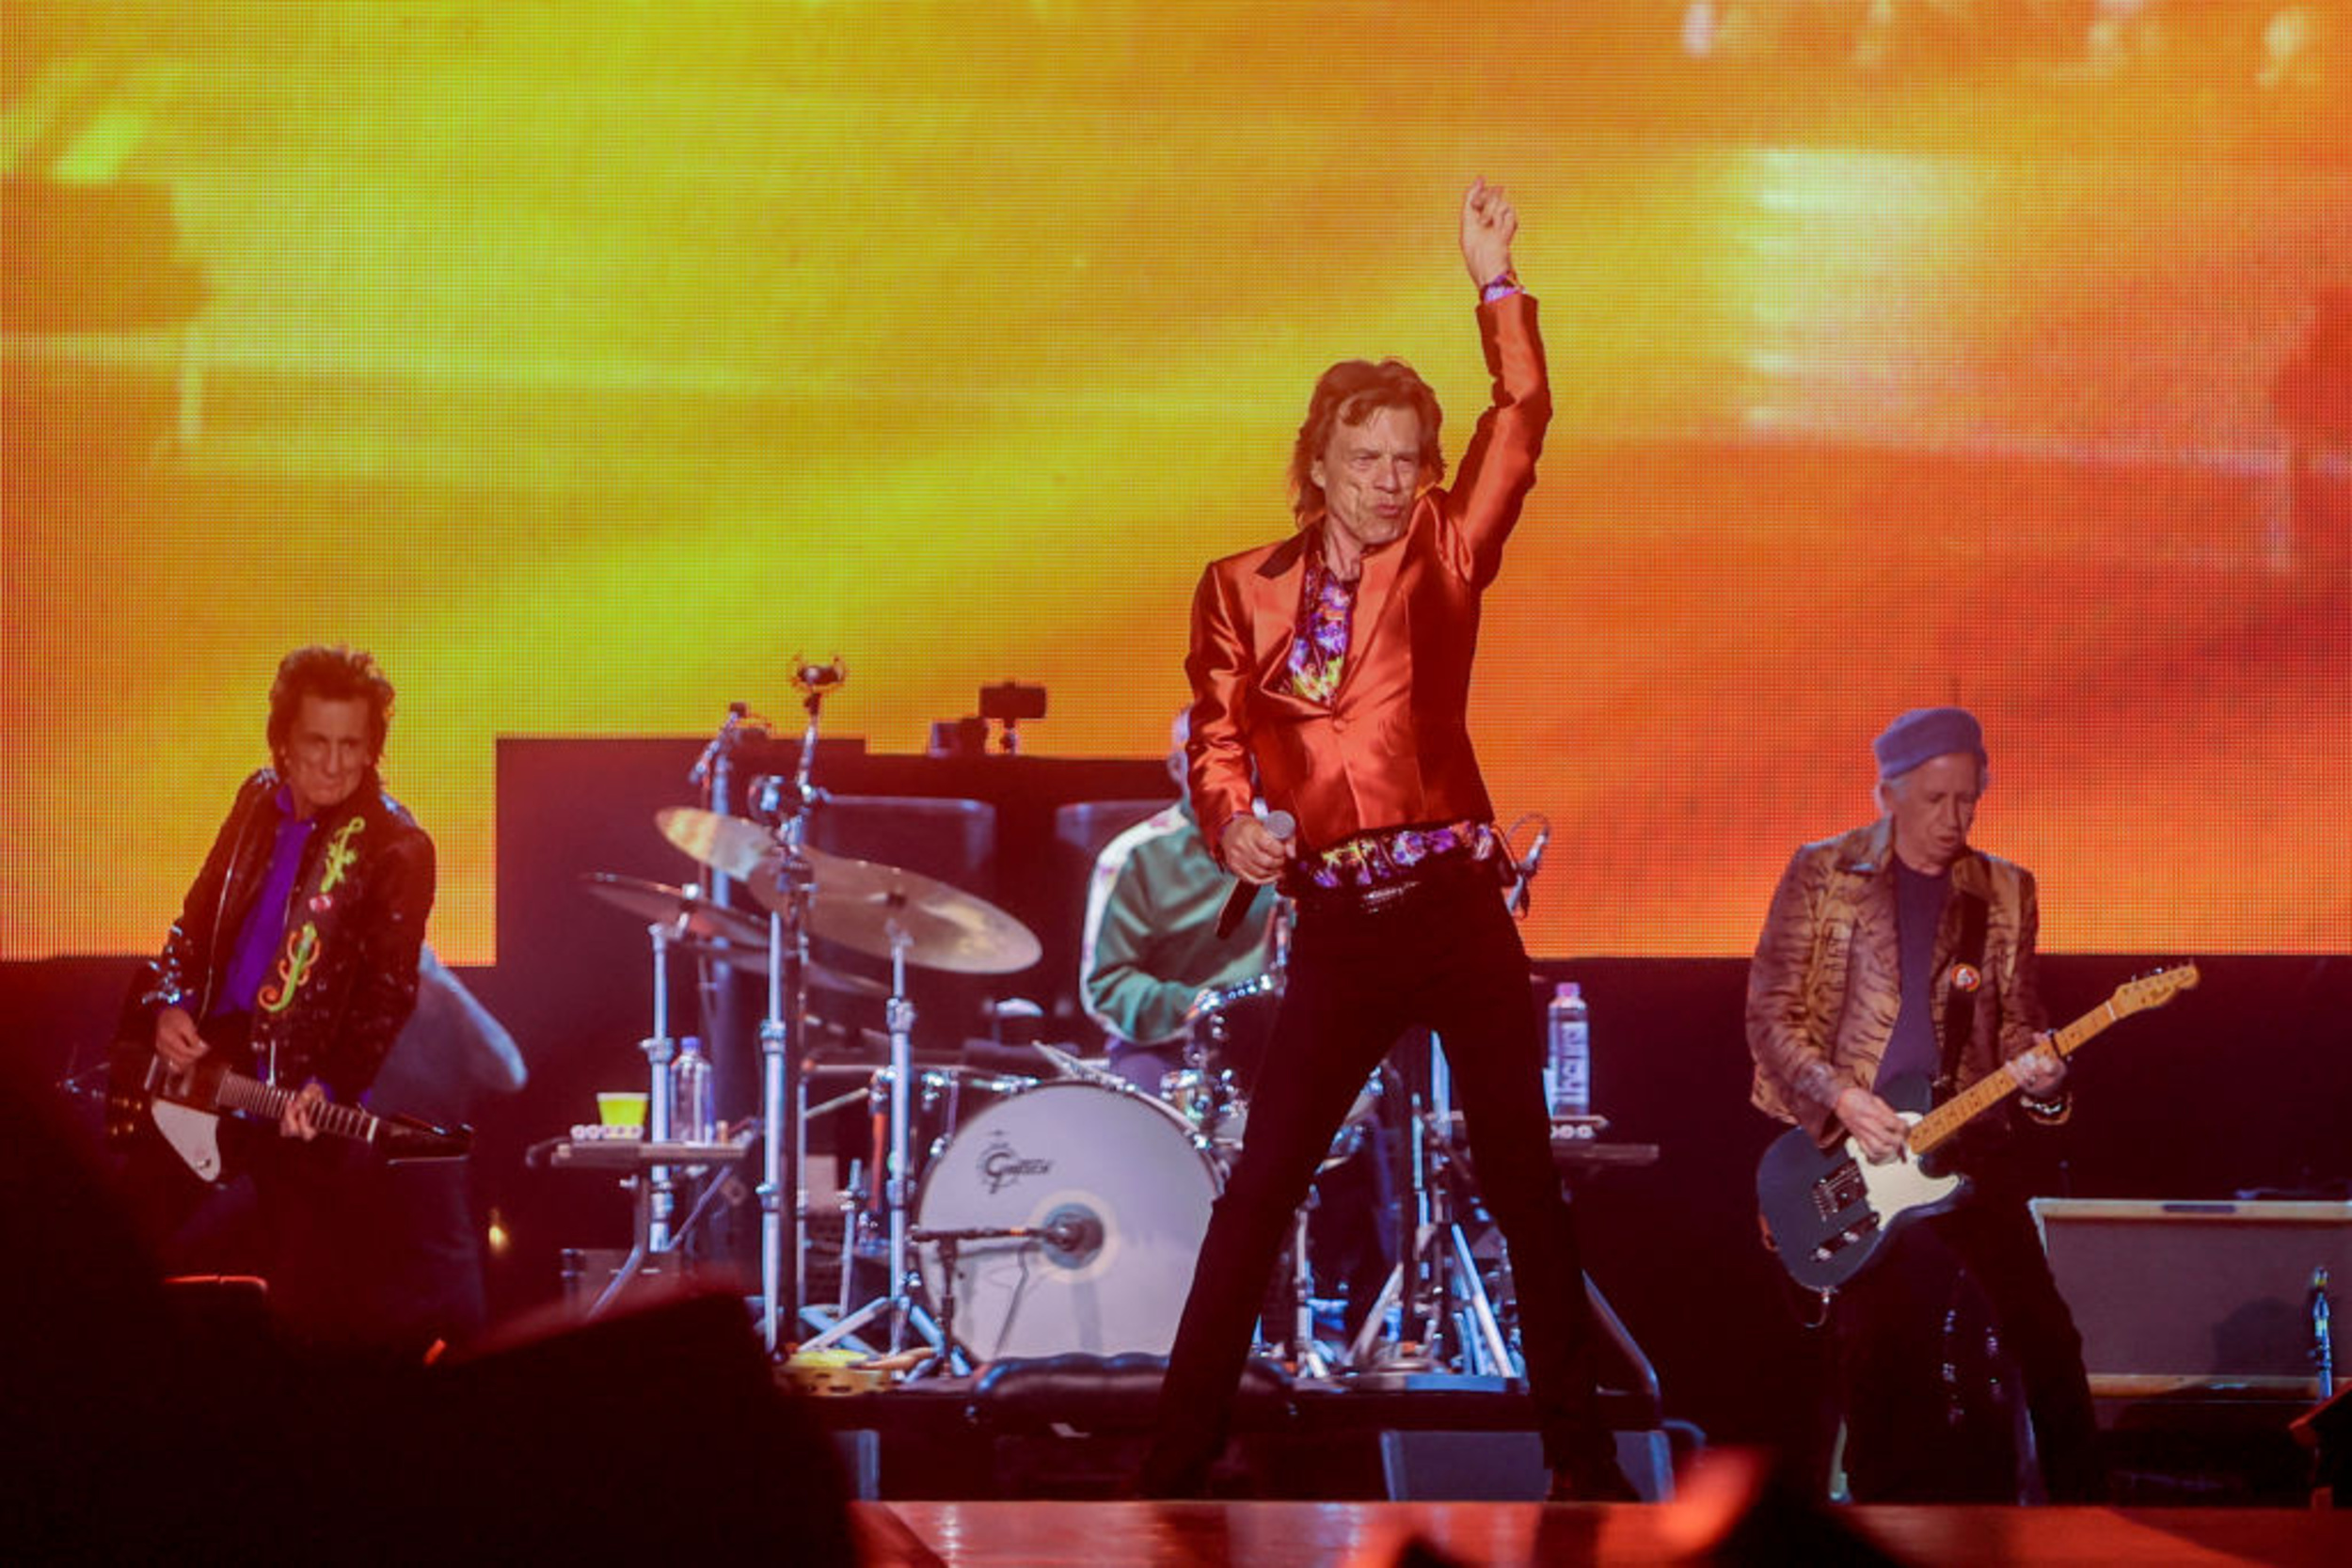 <p>Even after six decades since their first U.S. tour, The Rolling Stones are still in high demand for live shows. The rock band is set to hit the road on a 16-city tour to support their latest album <em>Hackney Diamonds.</em> The tour will run from April 28th through July 17th. </p><p>You may also like: <a href='https://www.yardbarker.com/entertainment/articles/the_25_most_insufferable_characters_in_film_history_022924/s1__29808299'>The 25 most insufferable characters in film history</a></p>